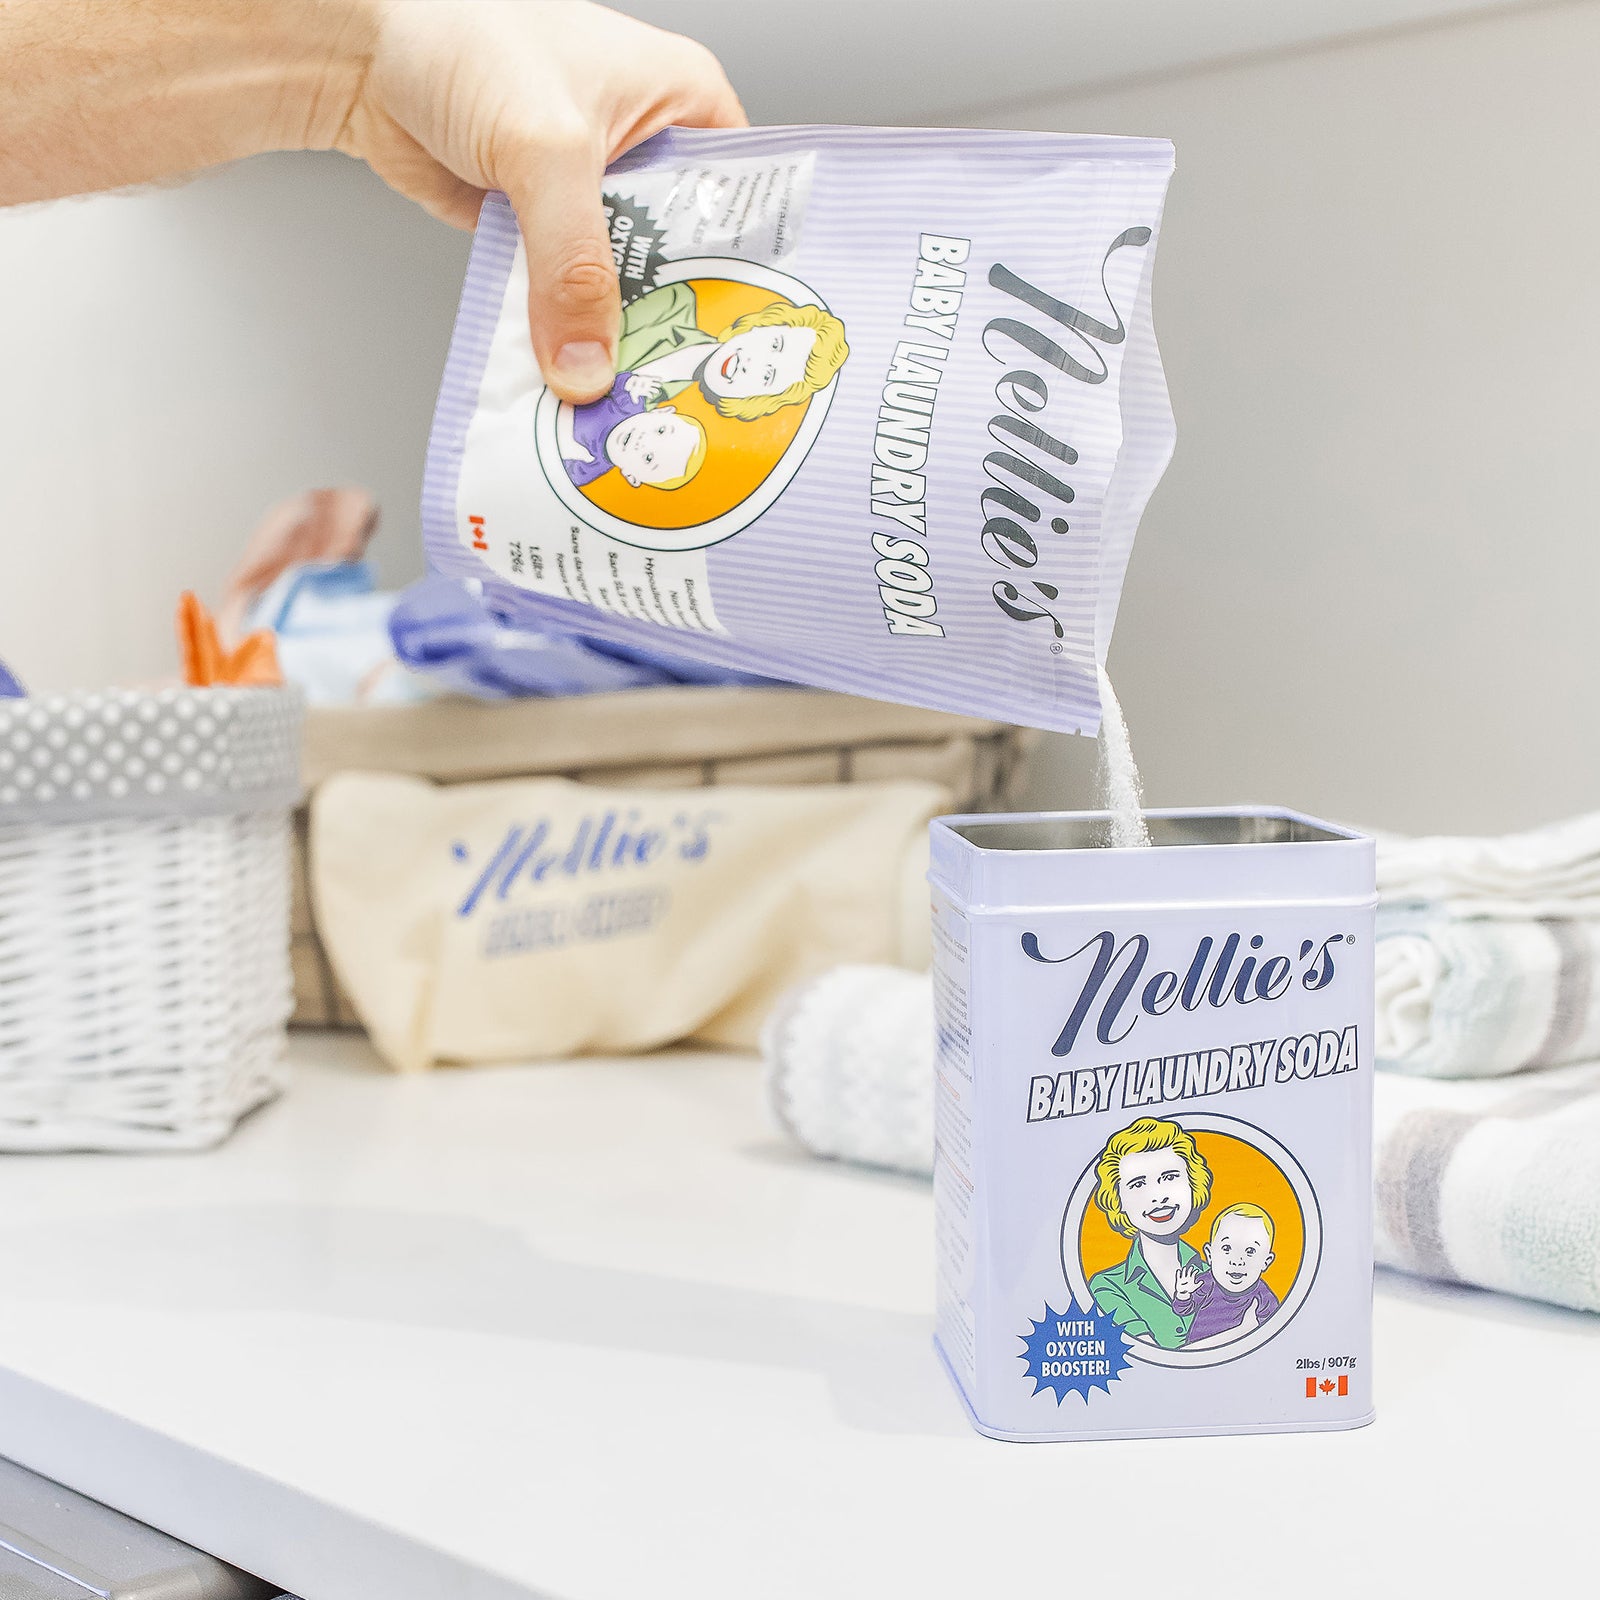 Nellie's - All Natural Baby Laundry Soda All THings Being Eco Chilliwack Zero Waste Refillery Since 2008